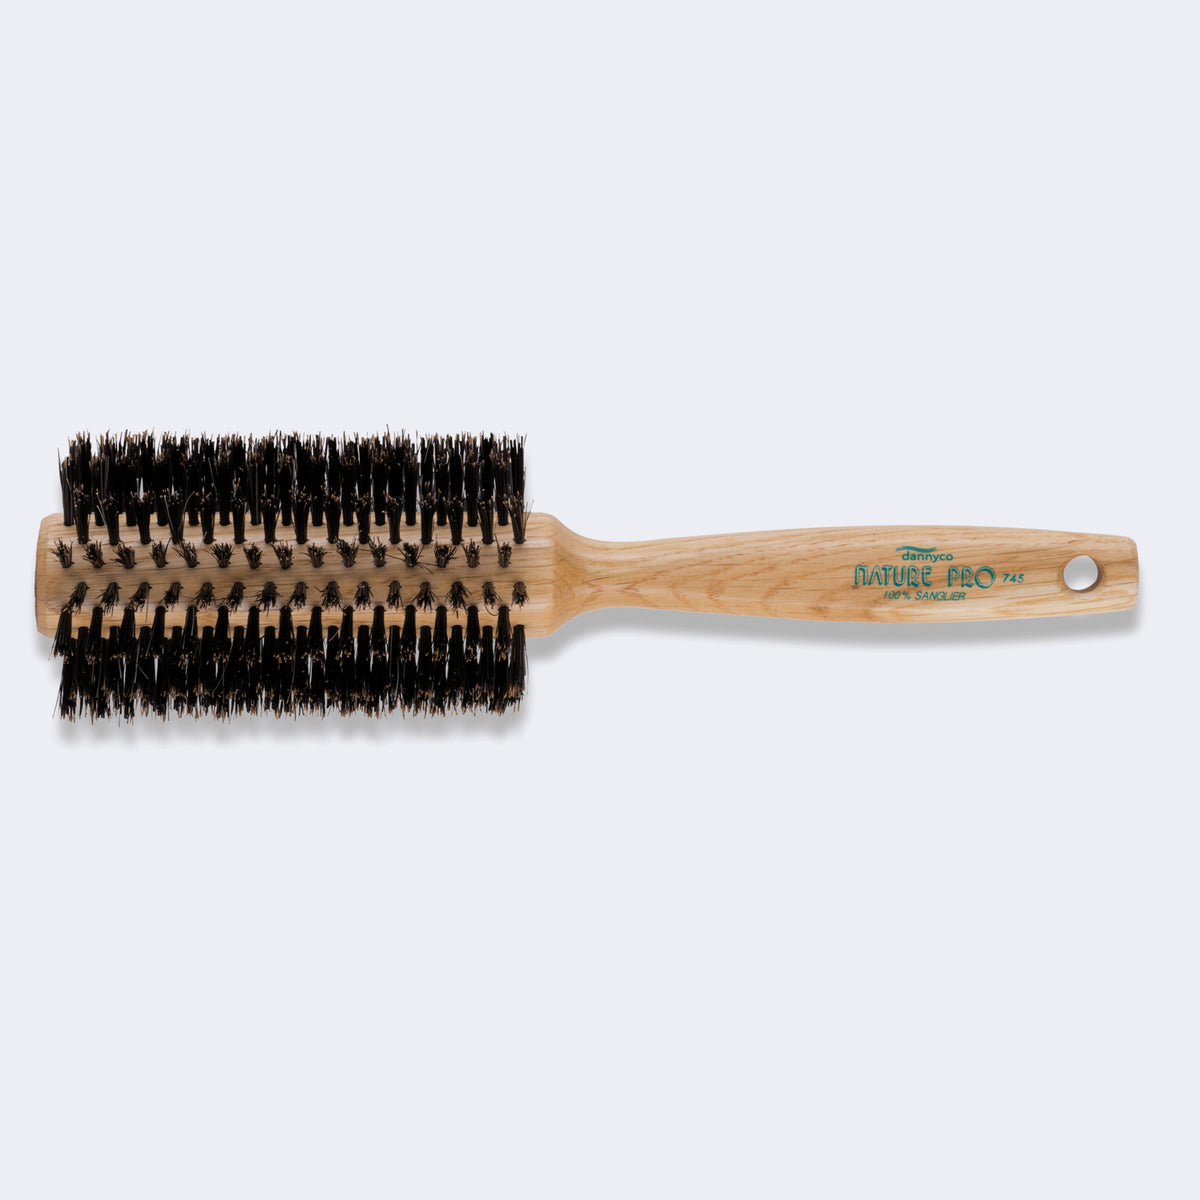 DANNYCO NATURE PRO CIRCULAR OAK WOOD BRUSH WITH BOAR BRISTLES, EXTRA-LARGE, SIXTEEN ROWS